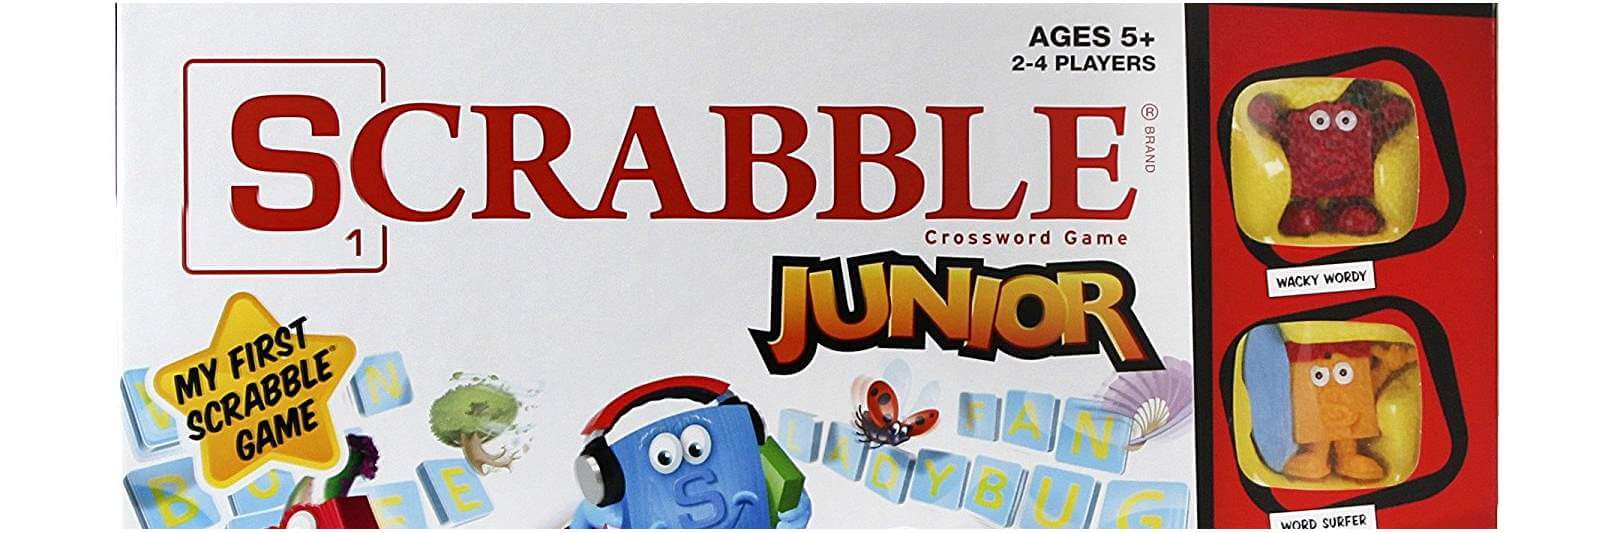 scrabble-junior-board-game-review-rules-instructions-ages-5-ratings-9-10